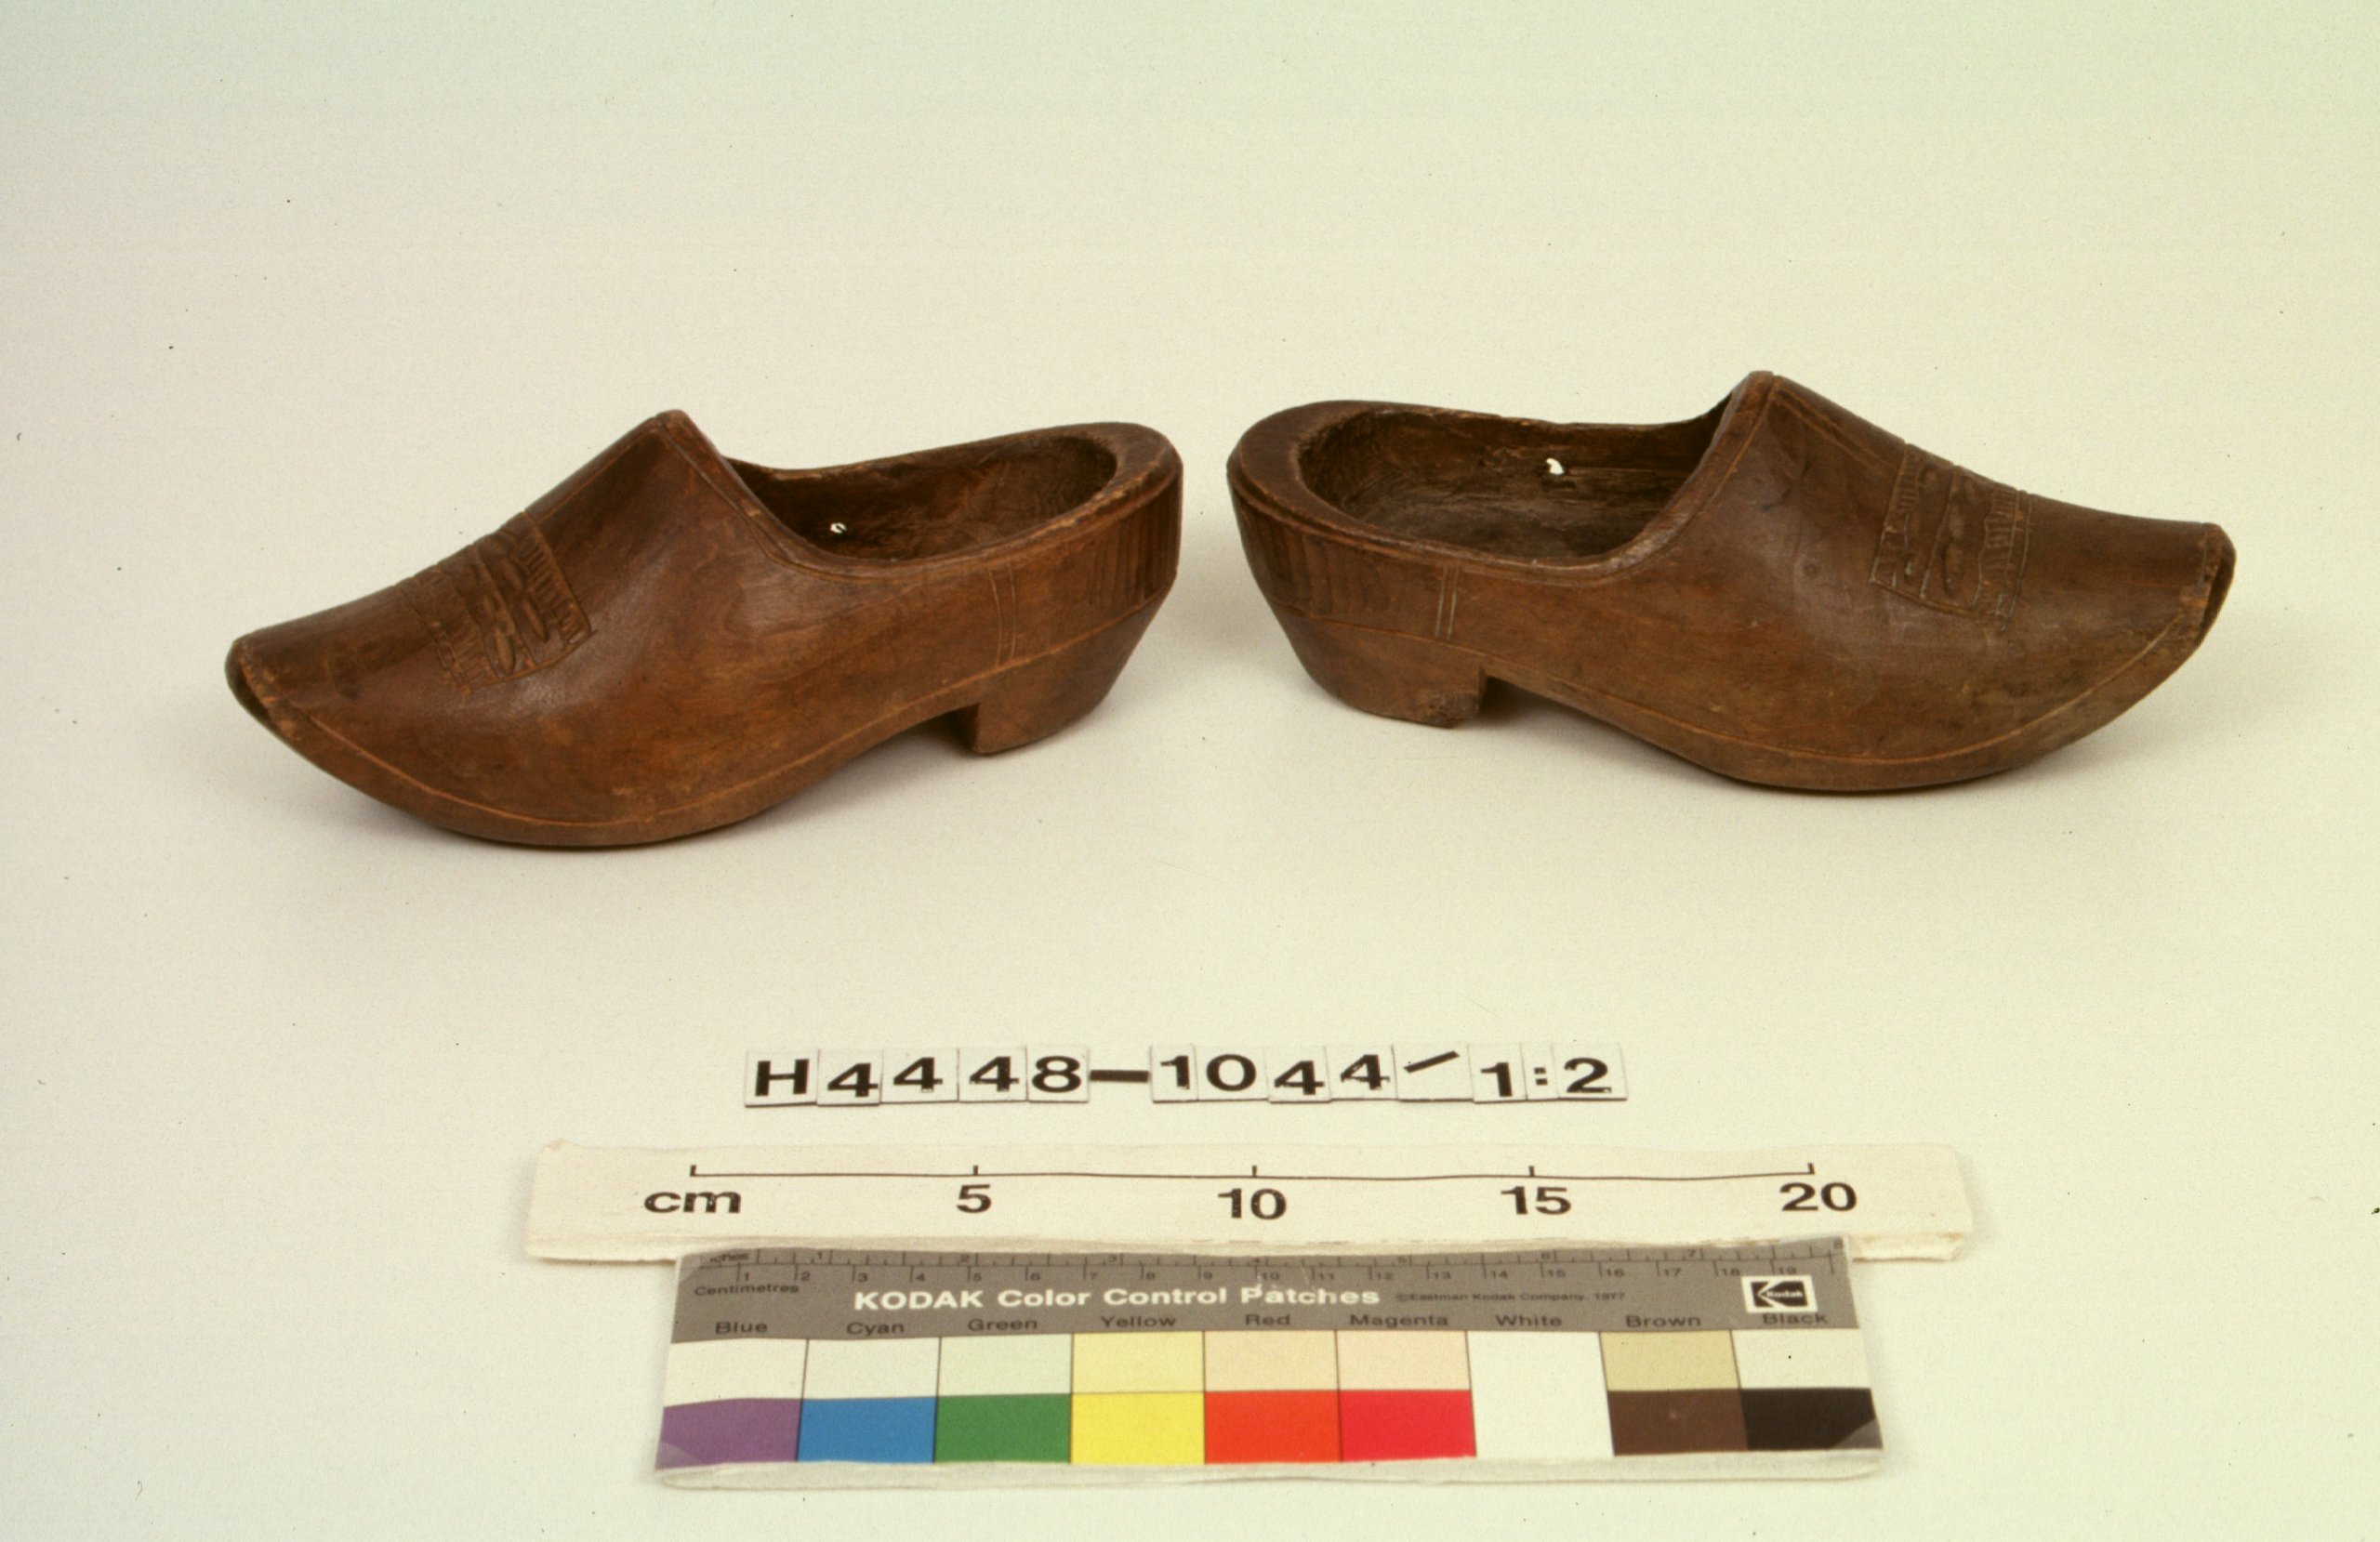 Pair of sabot clogs from the Joseph Box collection